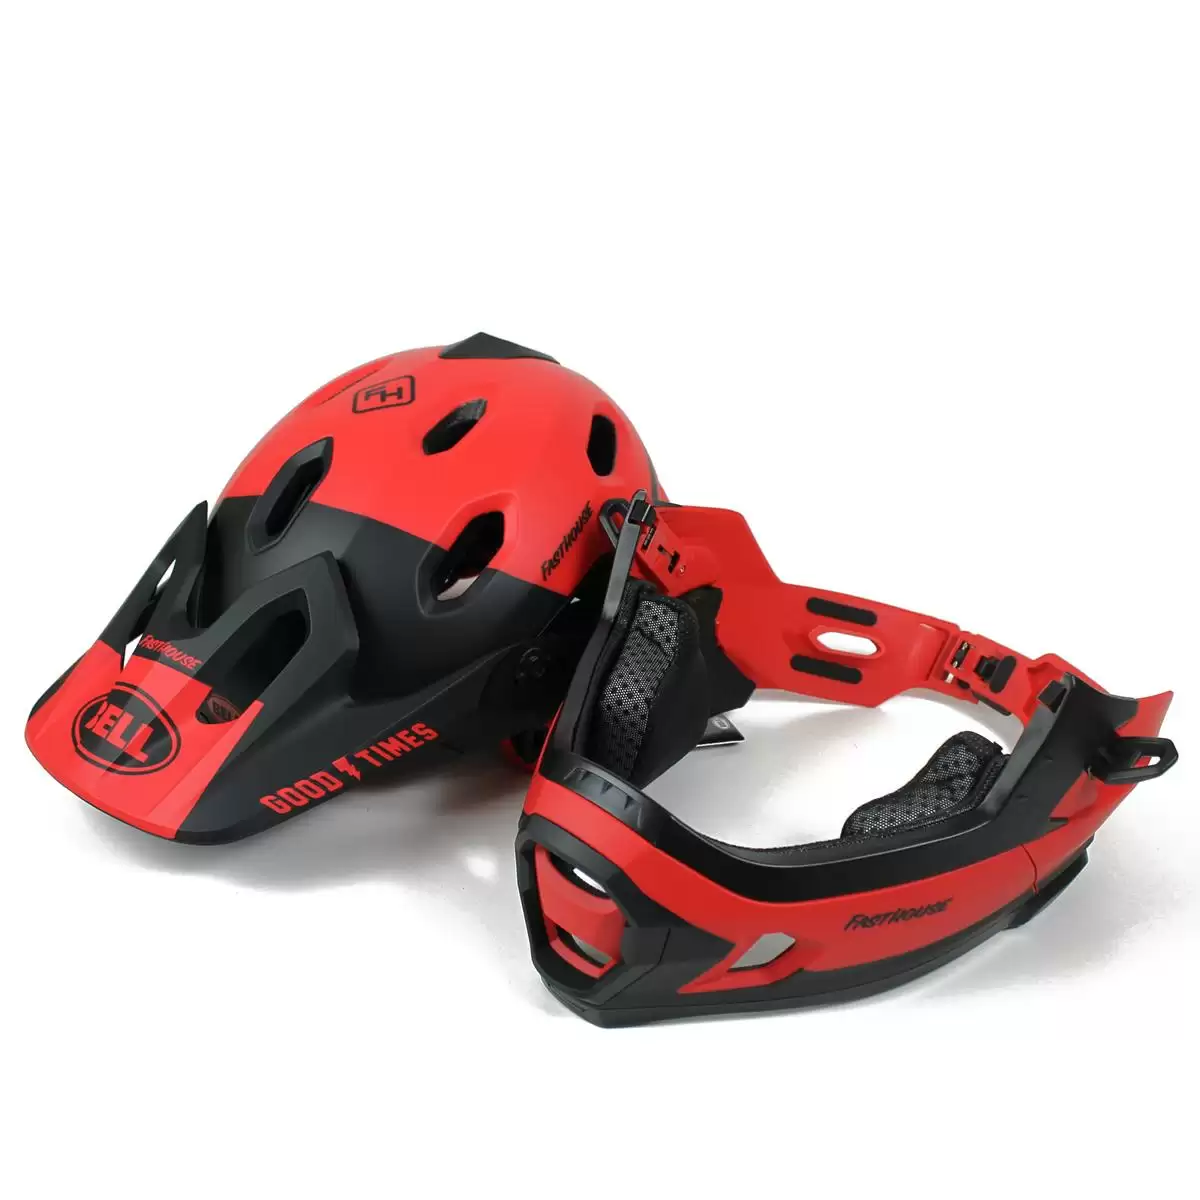 Helm Super DH MIPS Fasthouse Rot Größe S (52-56cm) #9